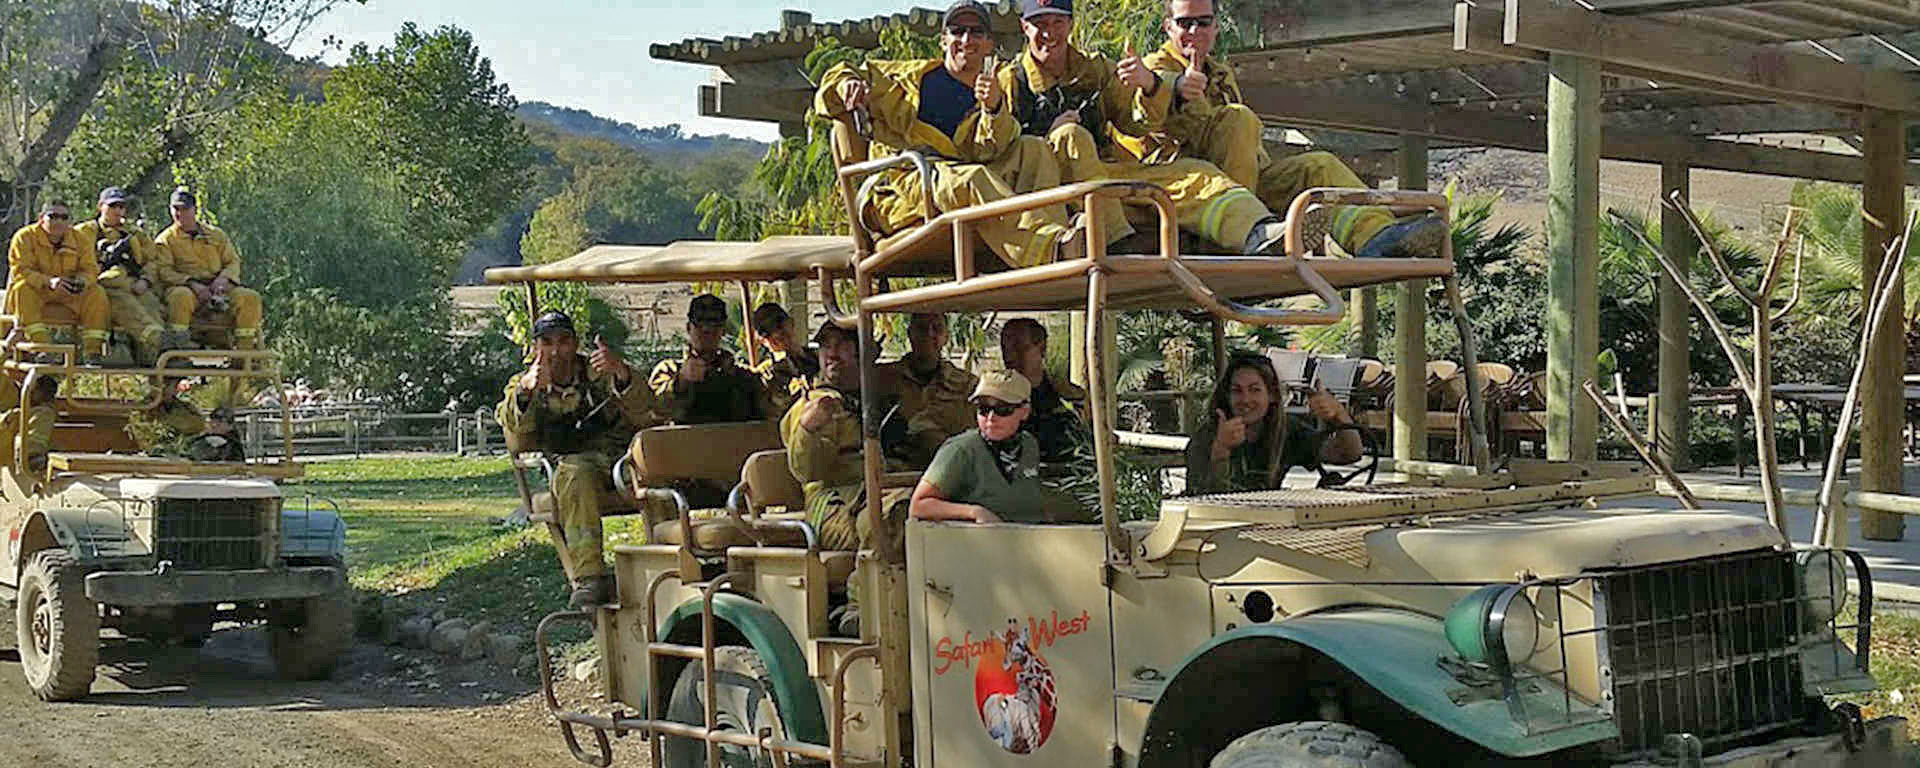 Firefighters enjoy a Safari after Tubbs Fire